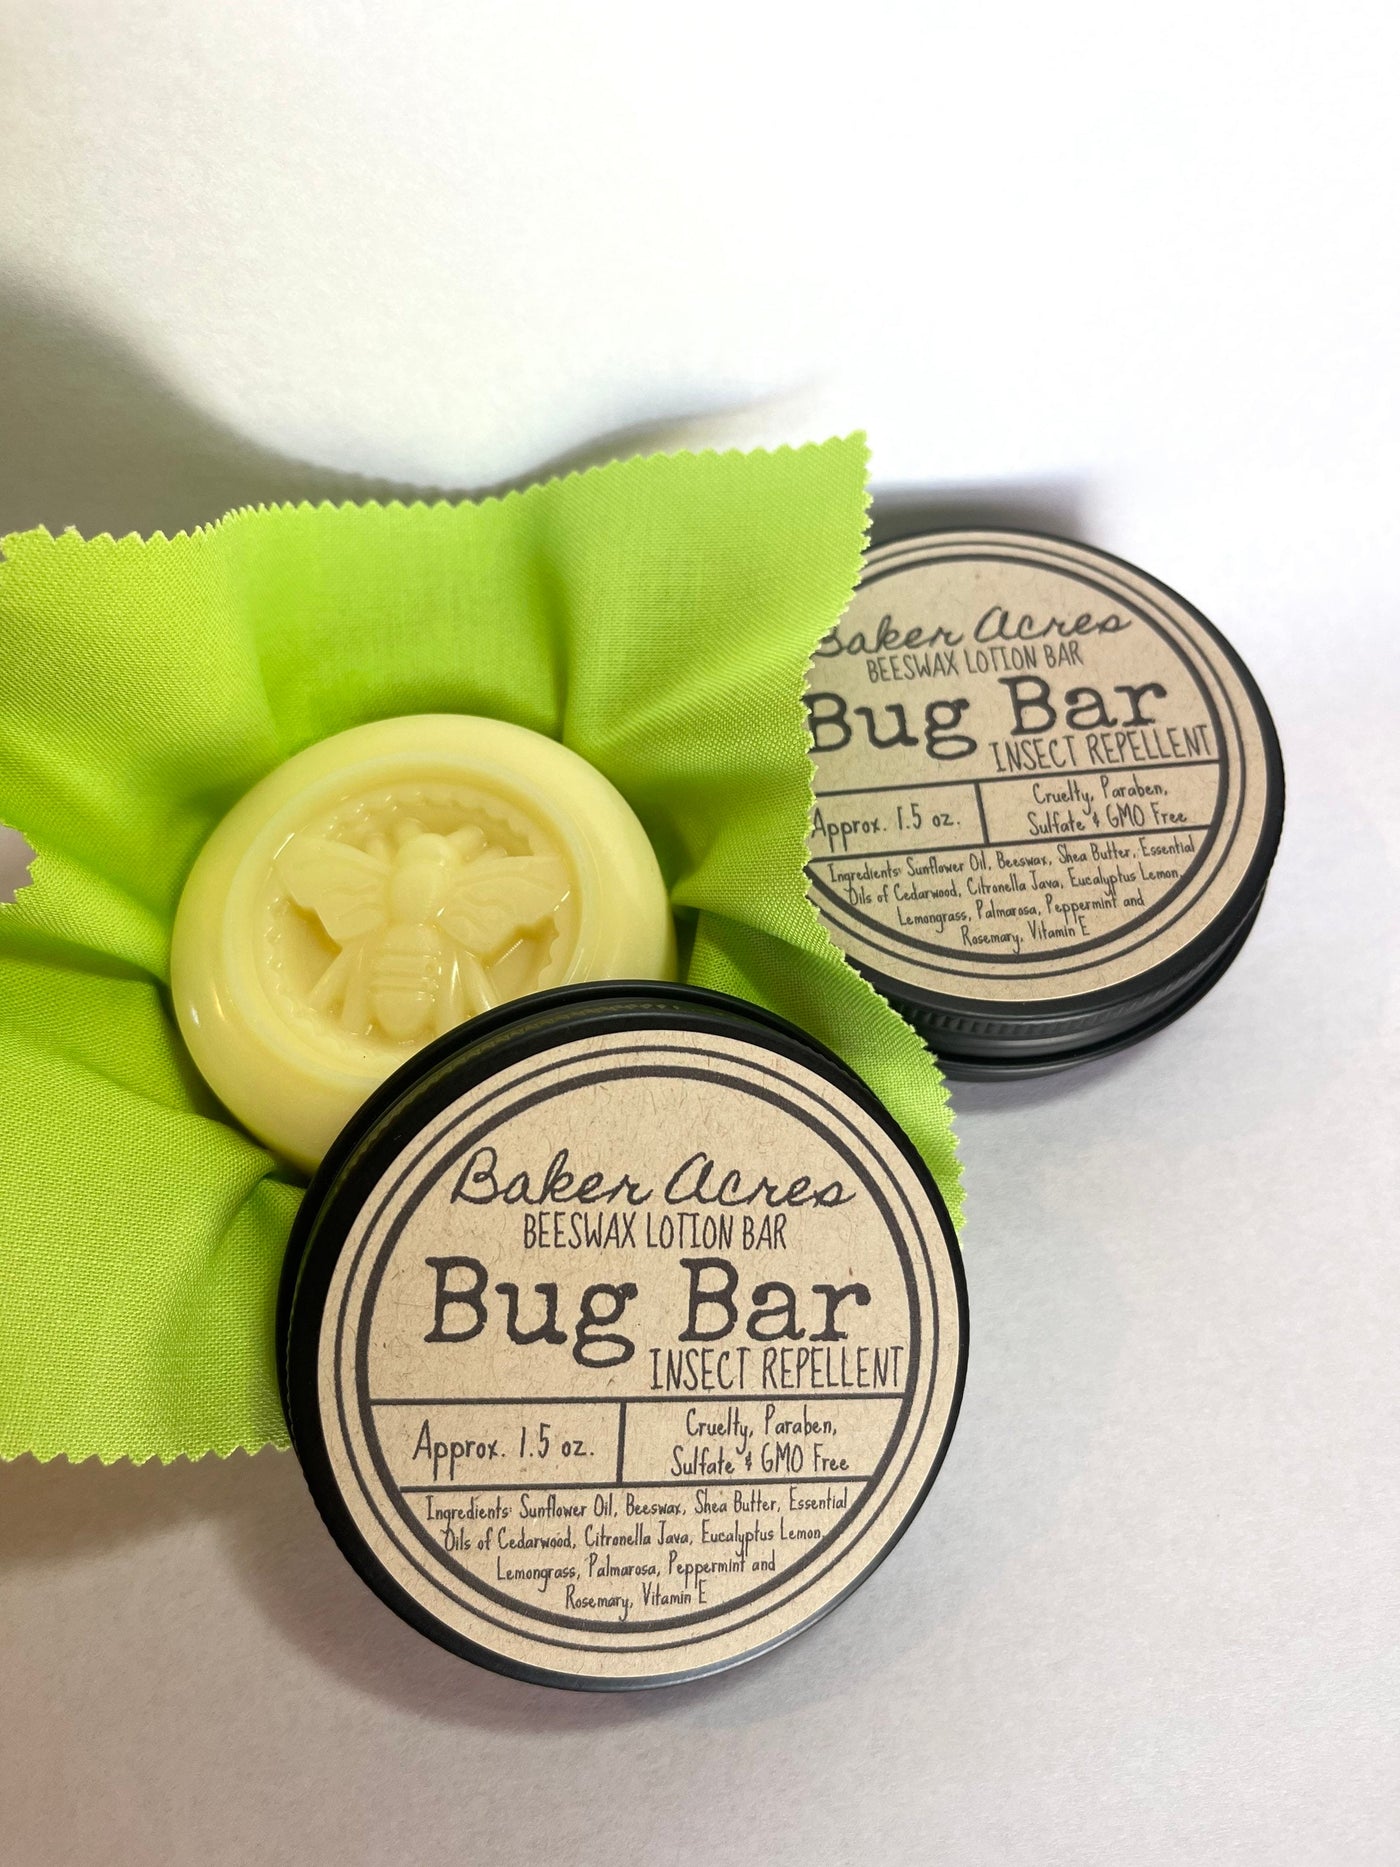 Beeswax Lotion Bar | Insect Repellent Lotion Bar | Natural Bug Repellent (Kids Safe) | Mosquito Repellent | Outdoor Camping Gift | Deet Free